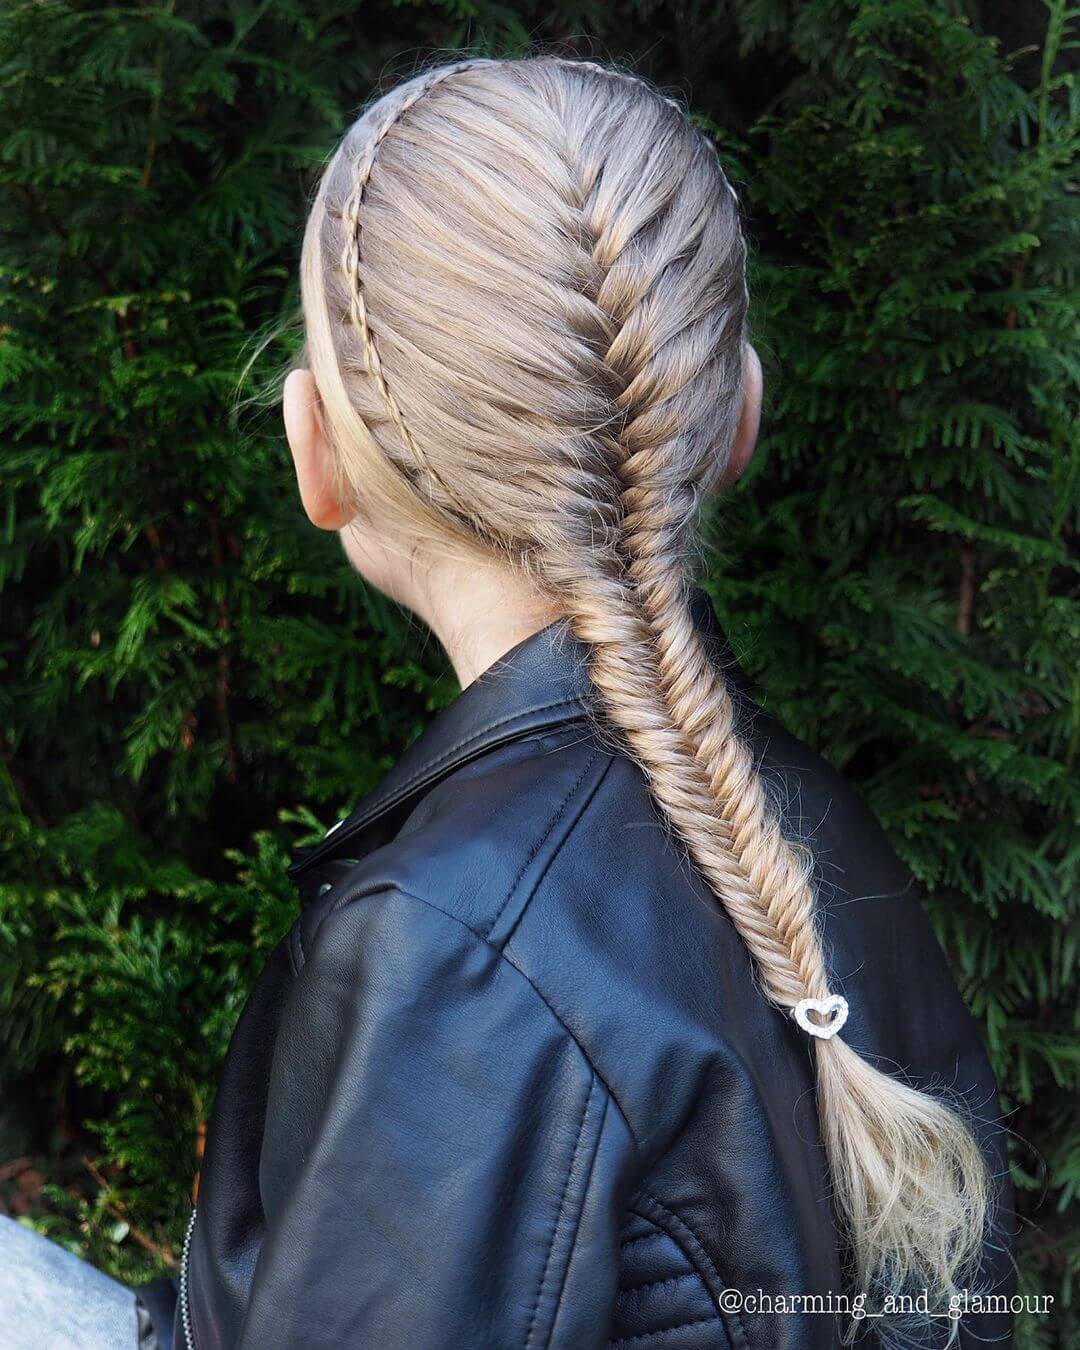 The Fishtail Braid hairstyles for kids With Long Hair